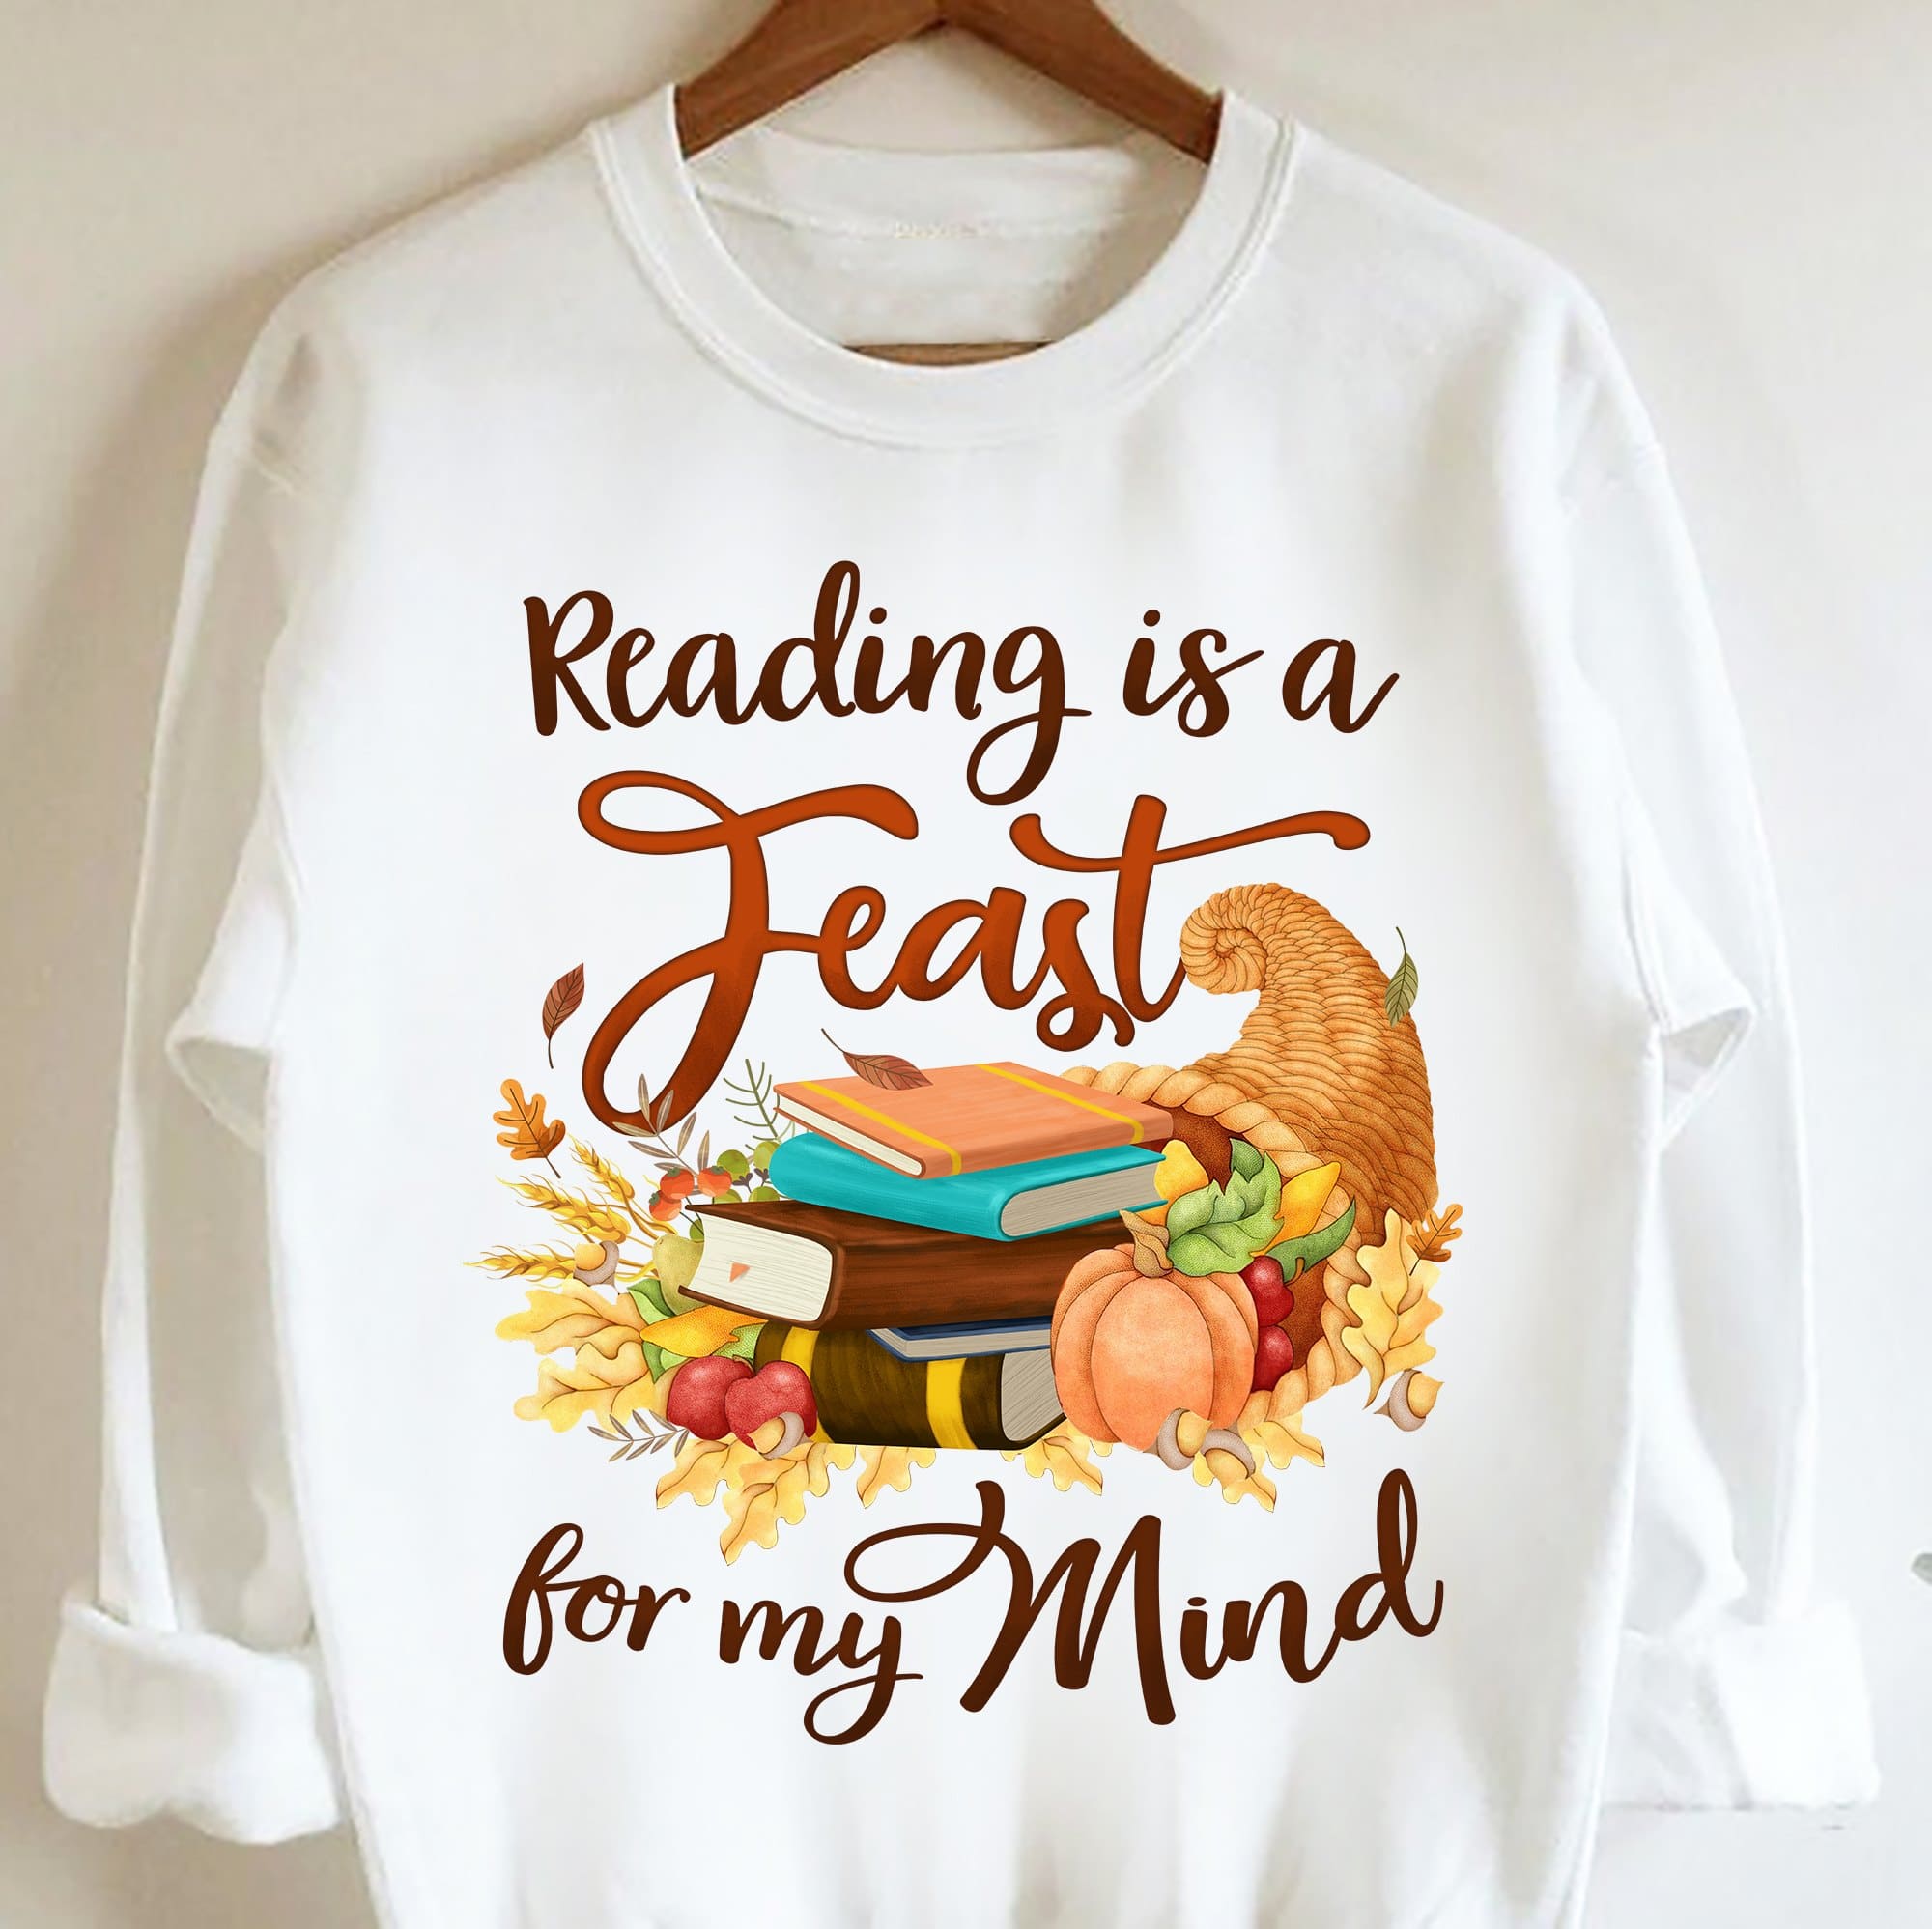 Reading is a yeast for my mind - Thanksgiving day gift, T-shirt for bookaholic